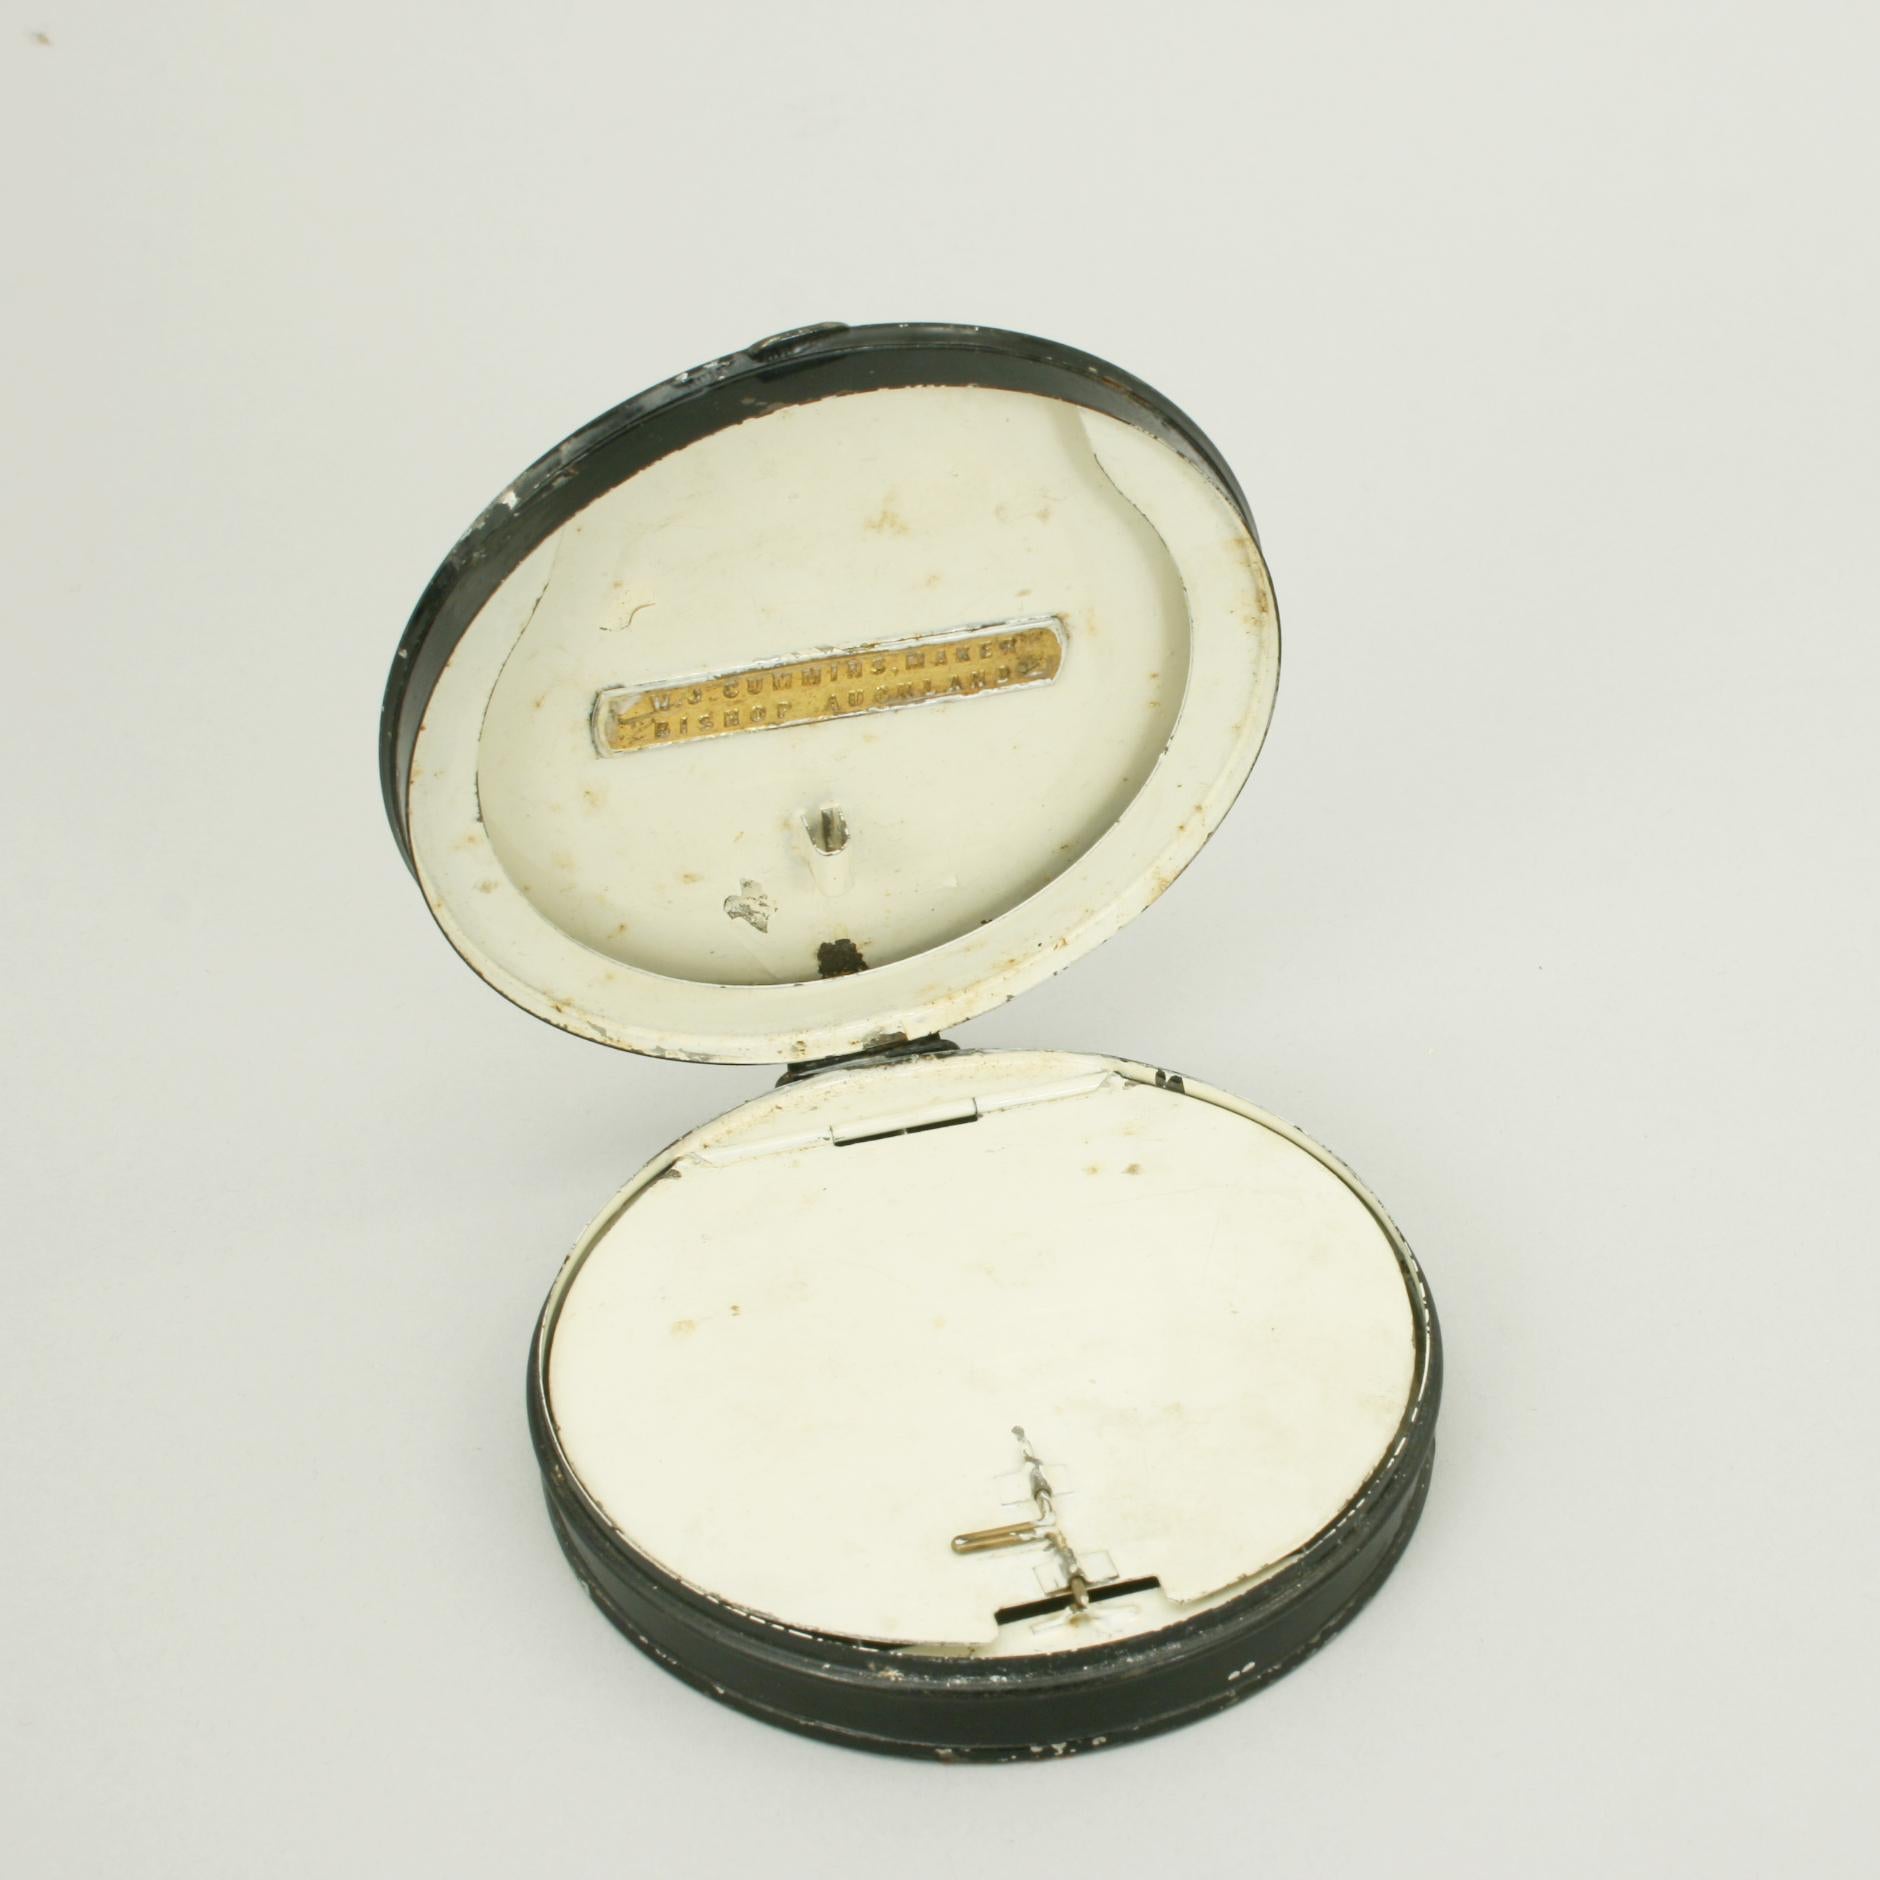 Round metal fishing cast tin.
A circular black japanned fishing tin made by W.J. Cummins of Bishop Auckland. The fishing cast and fly box is in good original condition. The interior is cream in colour with the lid for casts and the base fitted with